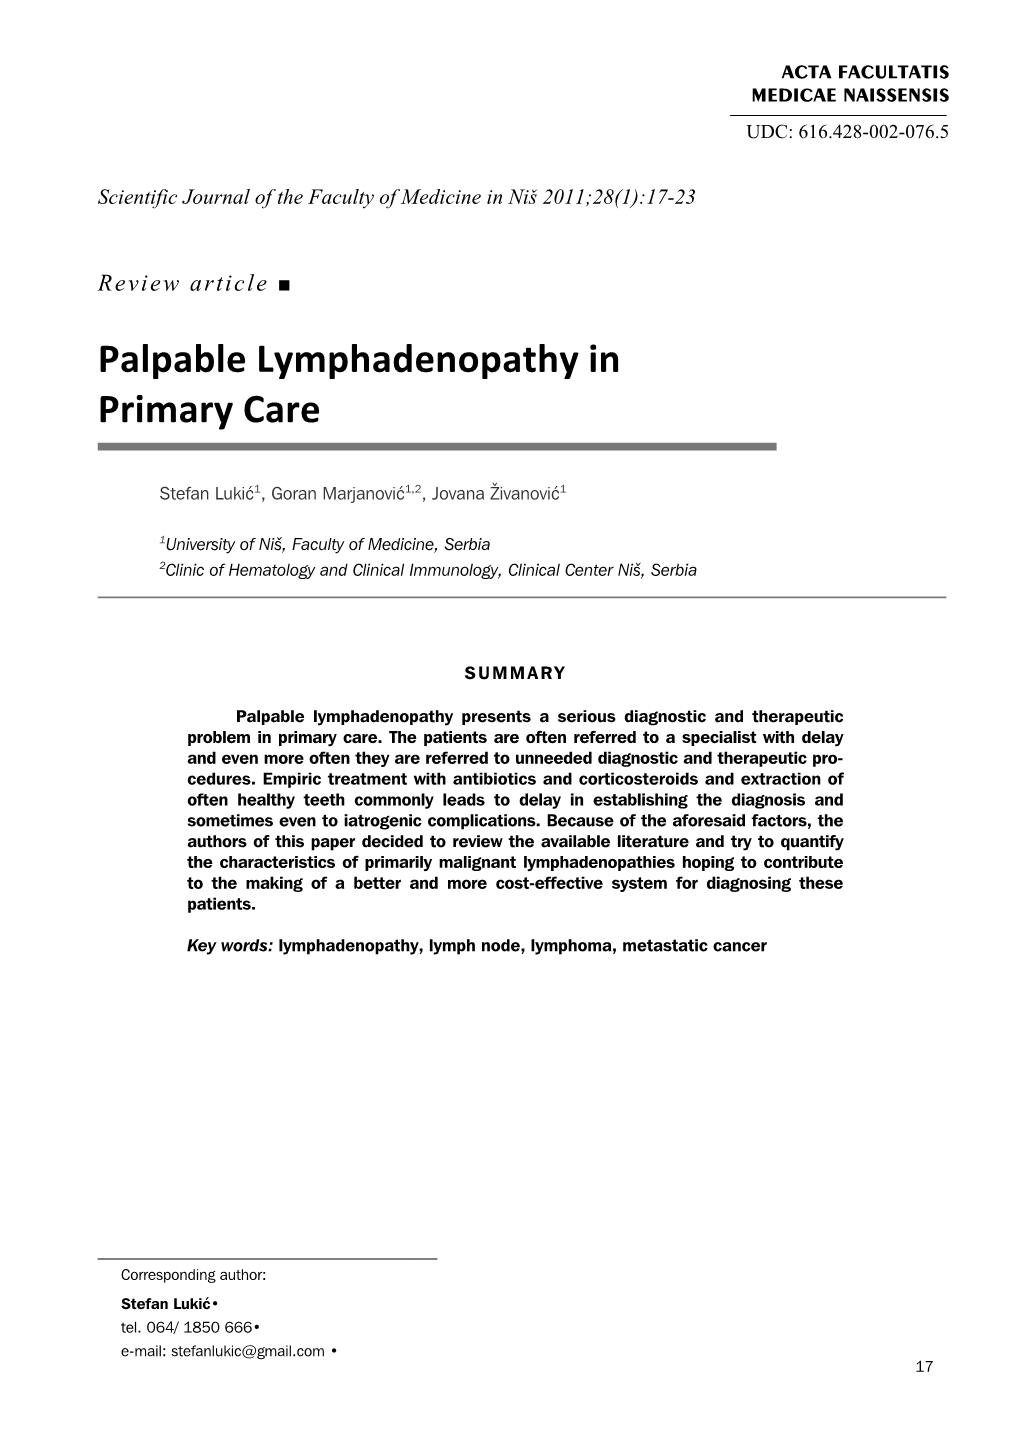 Palpable Lymphadenopathy in Primary Care